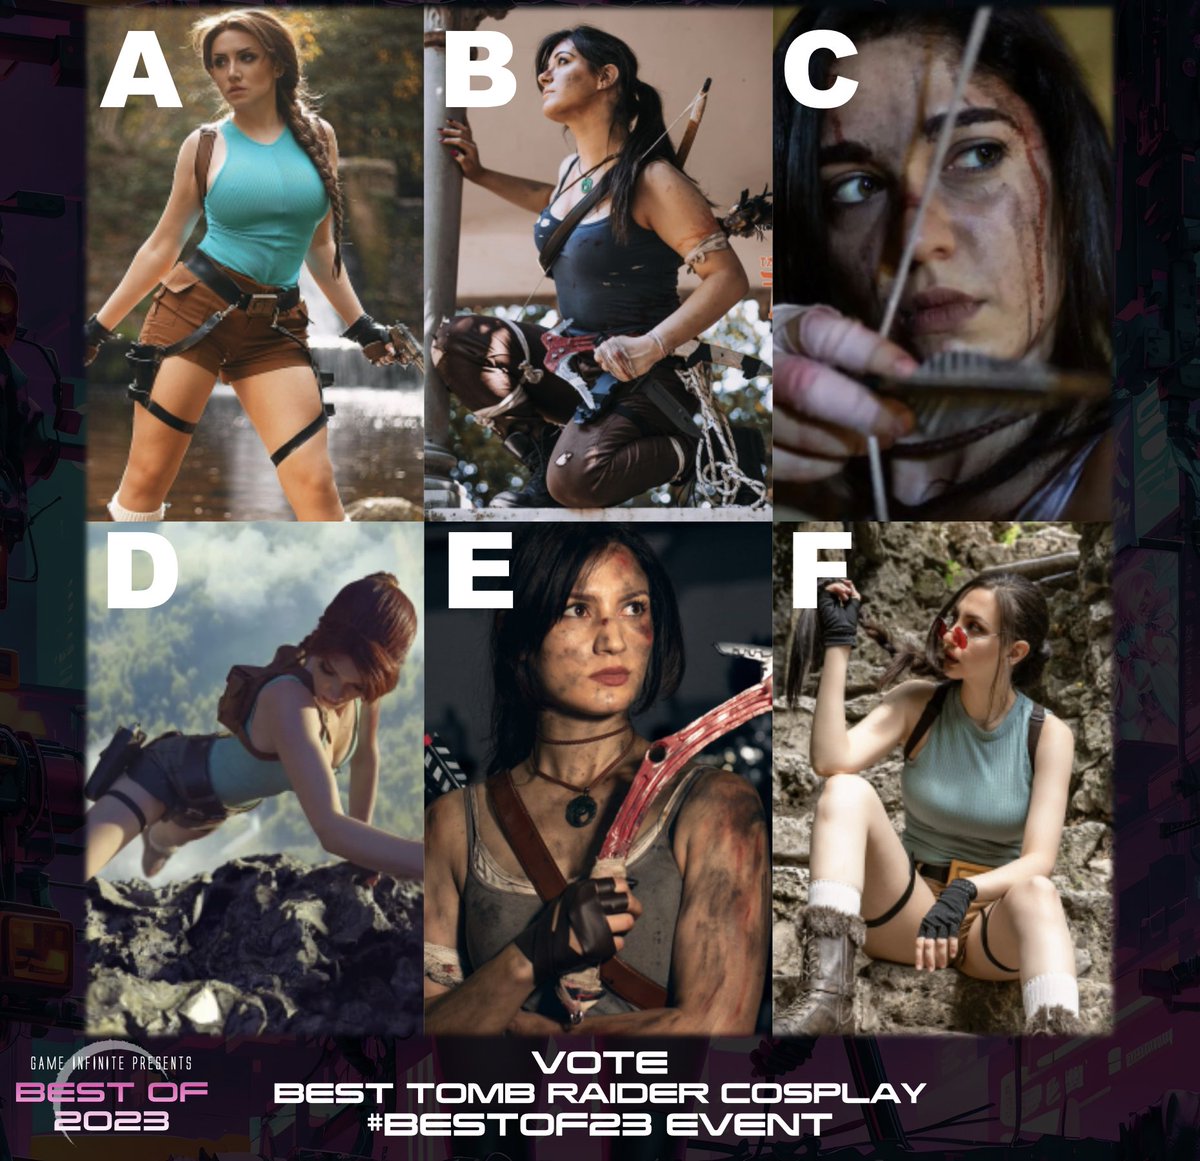 Best of 2023! Vote for Best Tomb Raider Cosplay! Comment below ⬇️ #tombraider #laracroft #tombraidercosplay